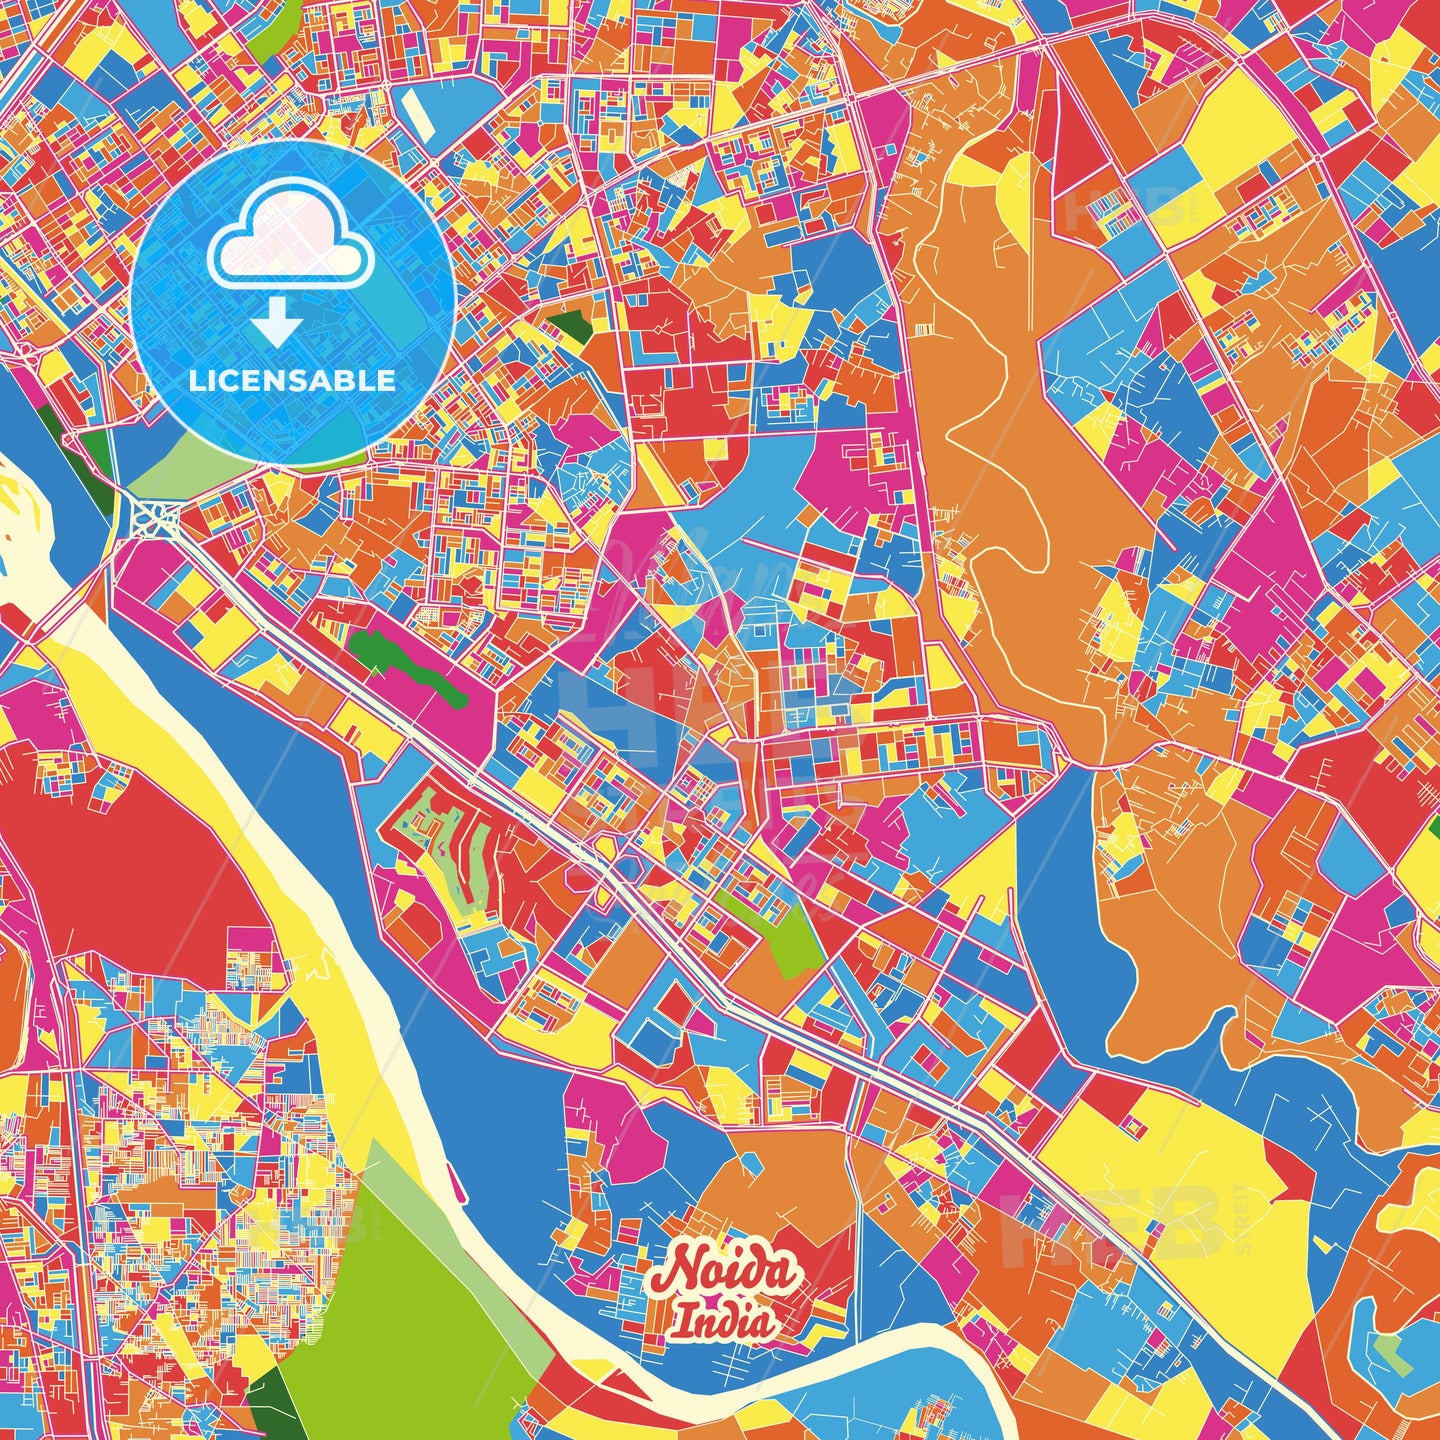 Noida, India Crazy Colorful Street Map Poster Template - HEBSTREITS Sketches